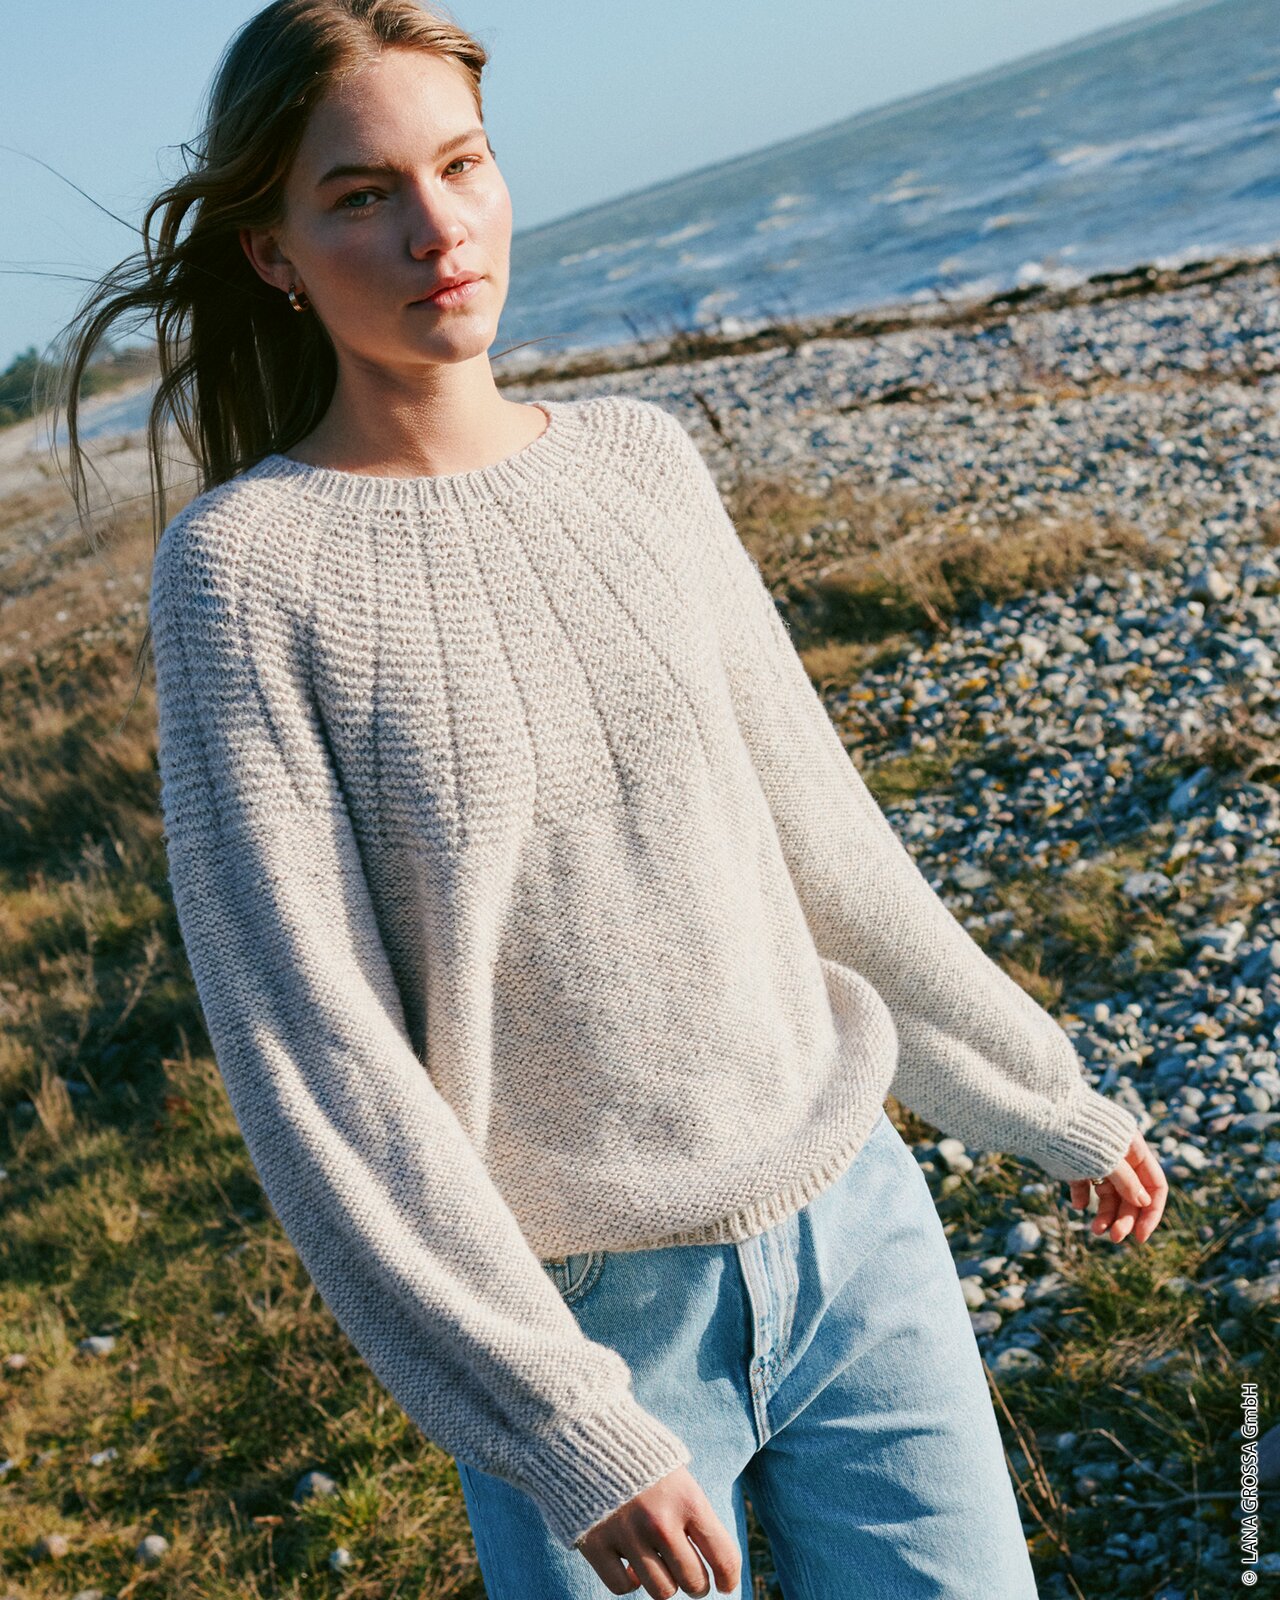 Models – ROUND-FIT SWEATER IN TWO PATTERNS - Ecopuno – LANA GROSSA